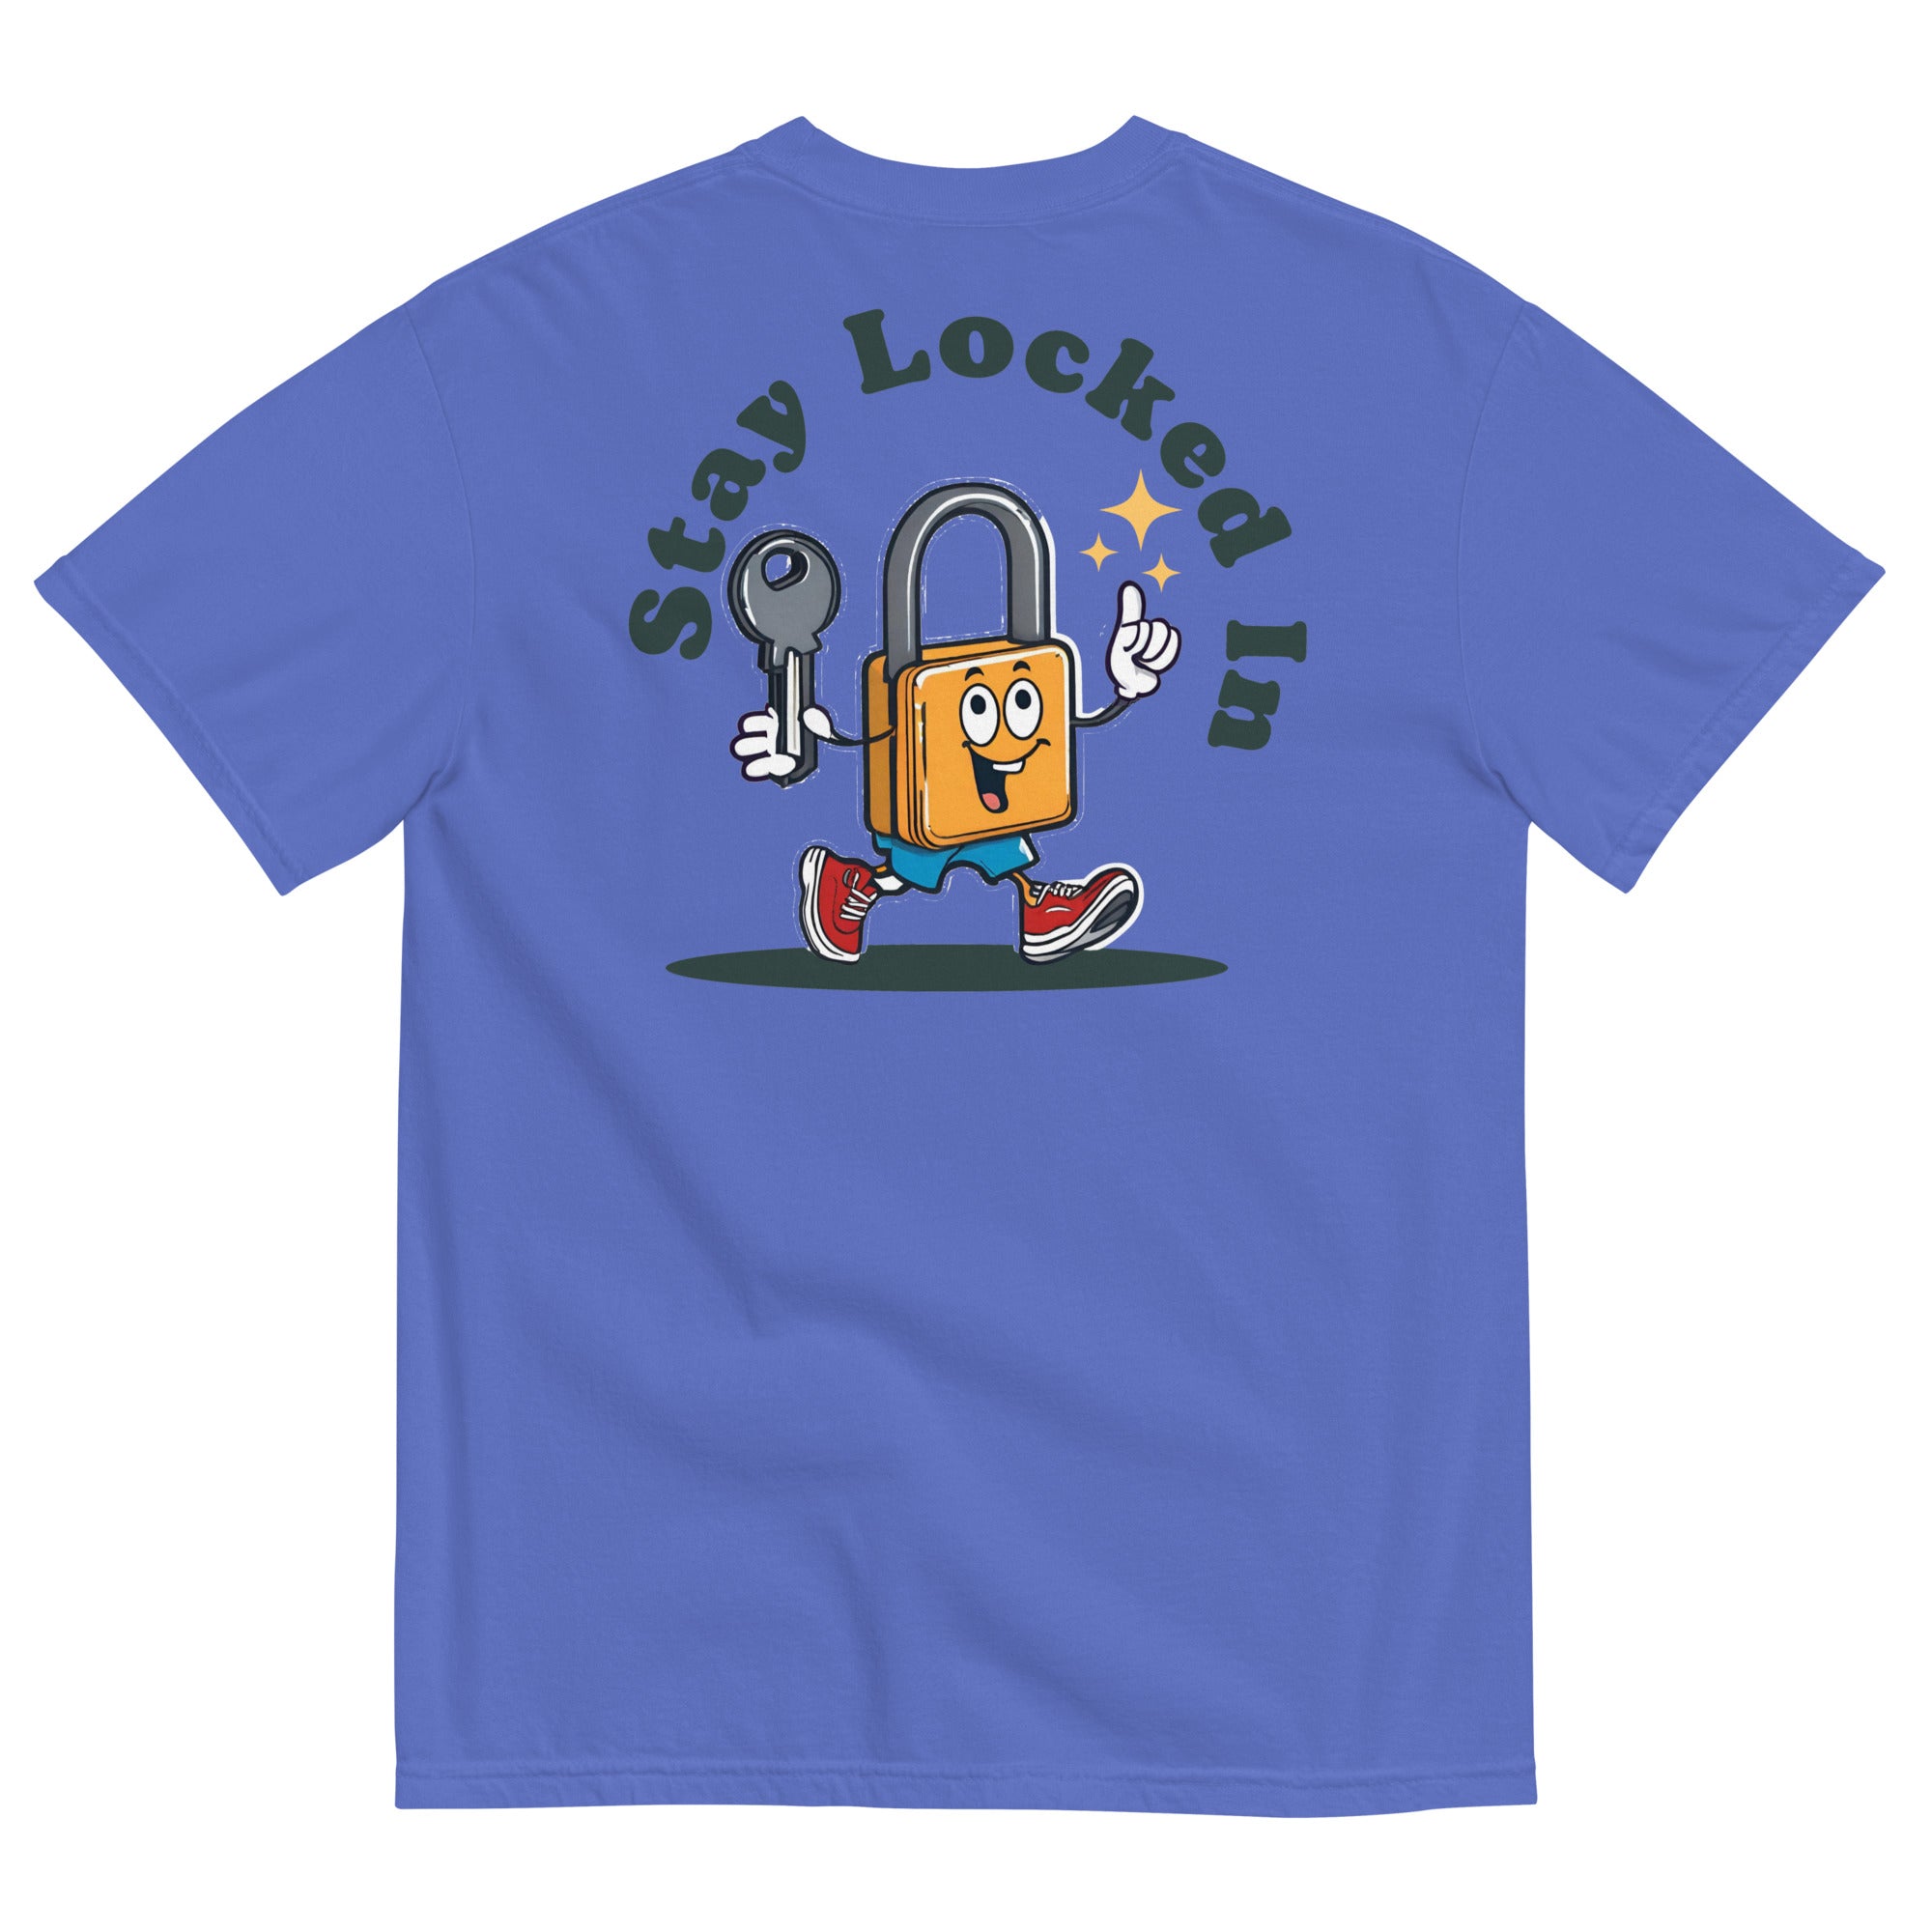 stay locked in t shirt